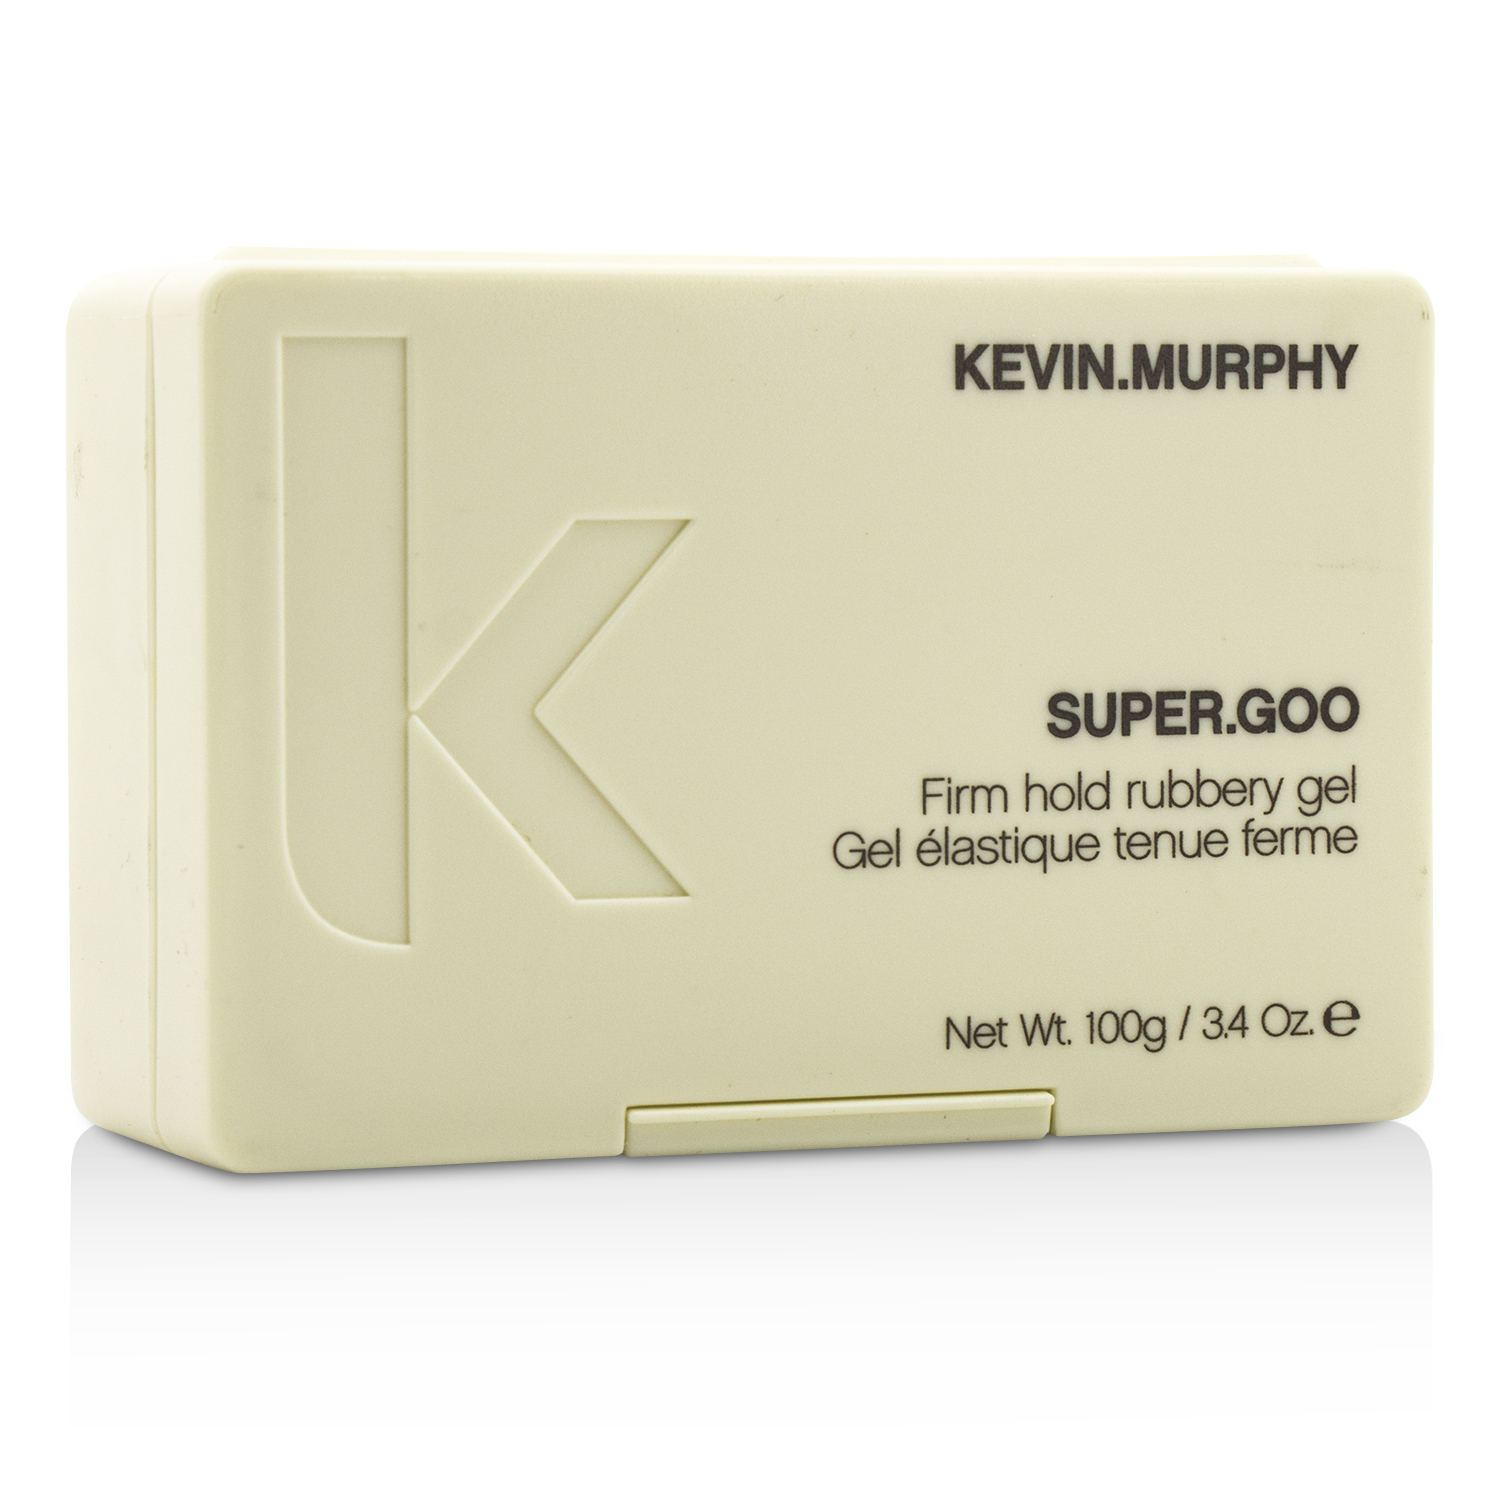 Super.Goo Firm Hold Rubbery Gel Kevin.Murphy Image